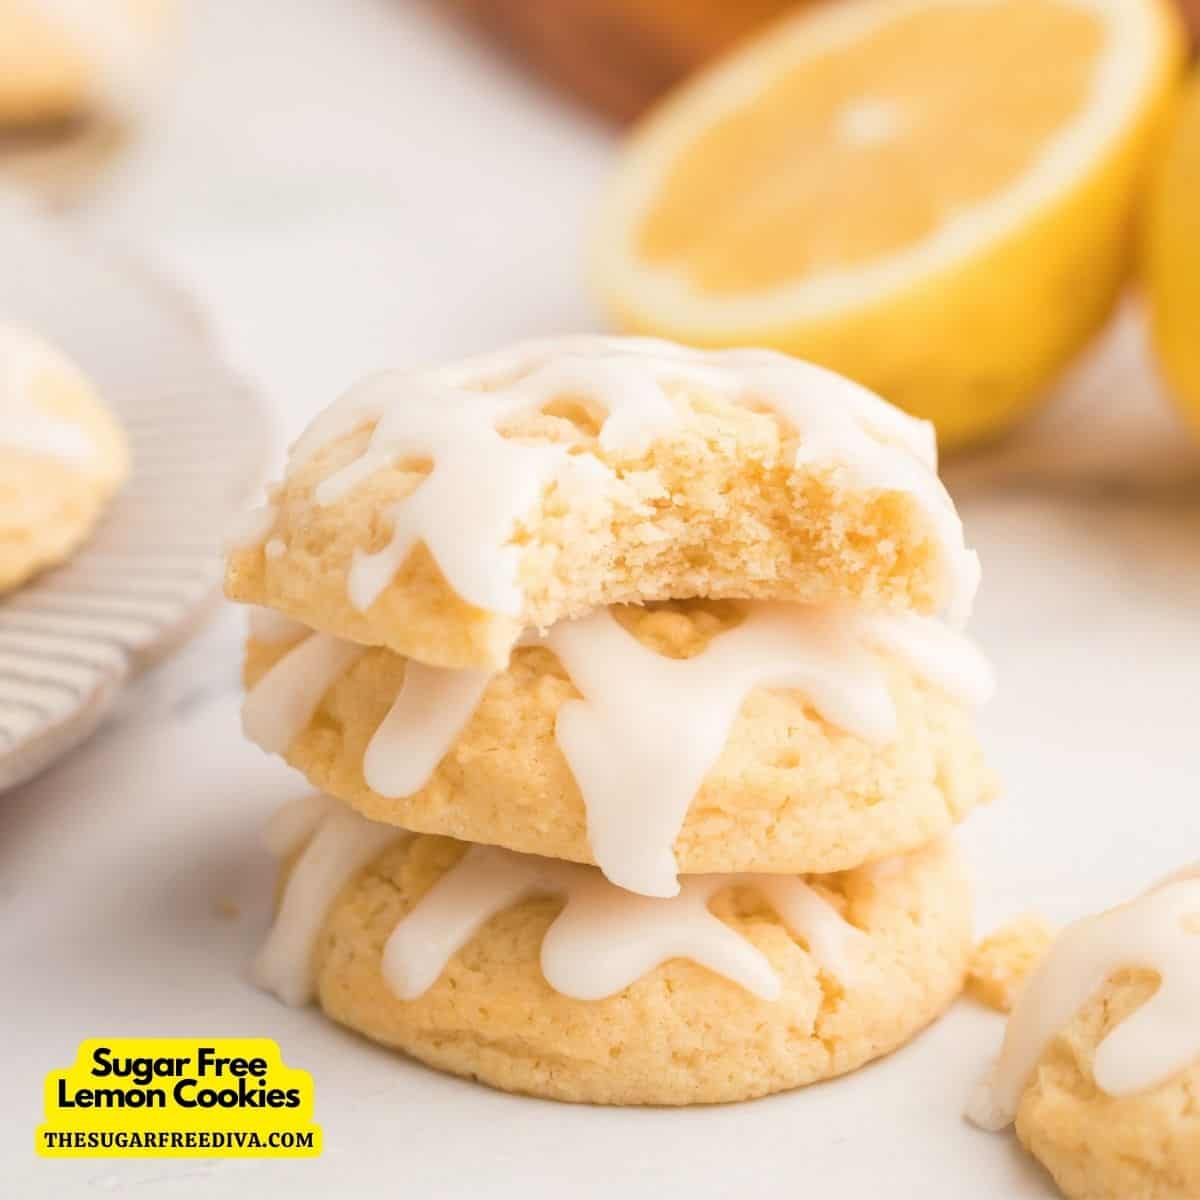 Sugar Free Lemon Cookies, a simple and delicious recipe for buttery soft cookies made with no added sugar. Optional sugar free glaze.